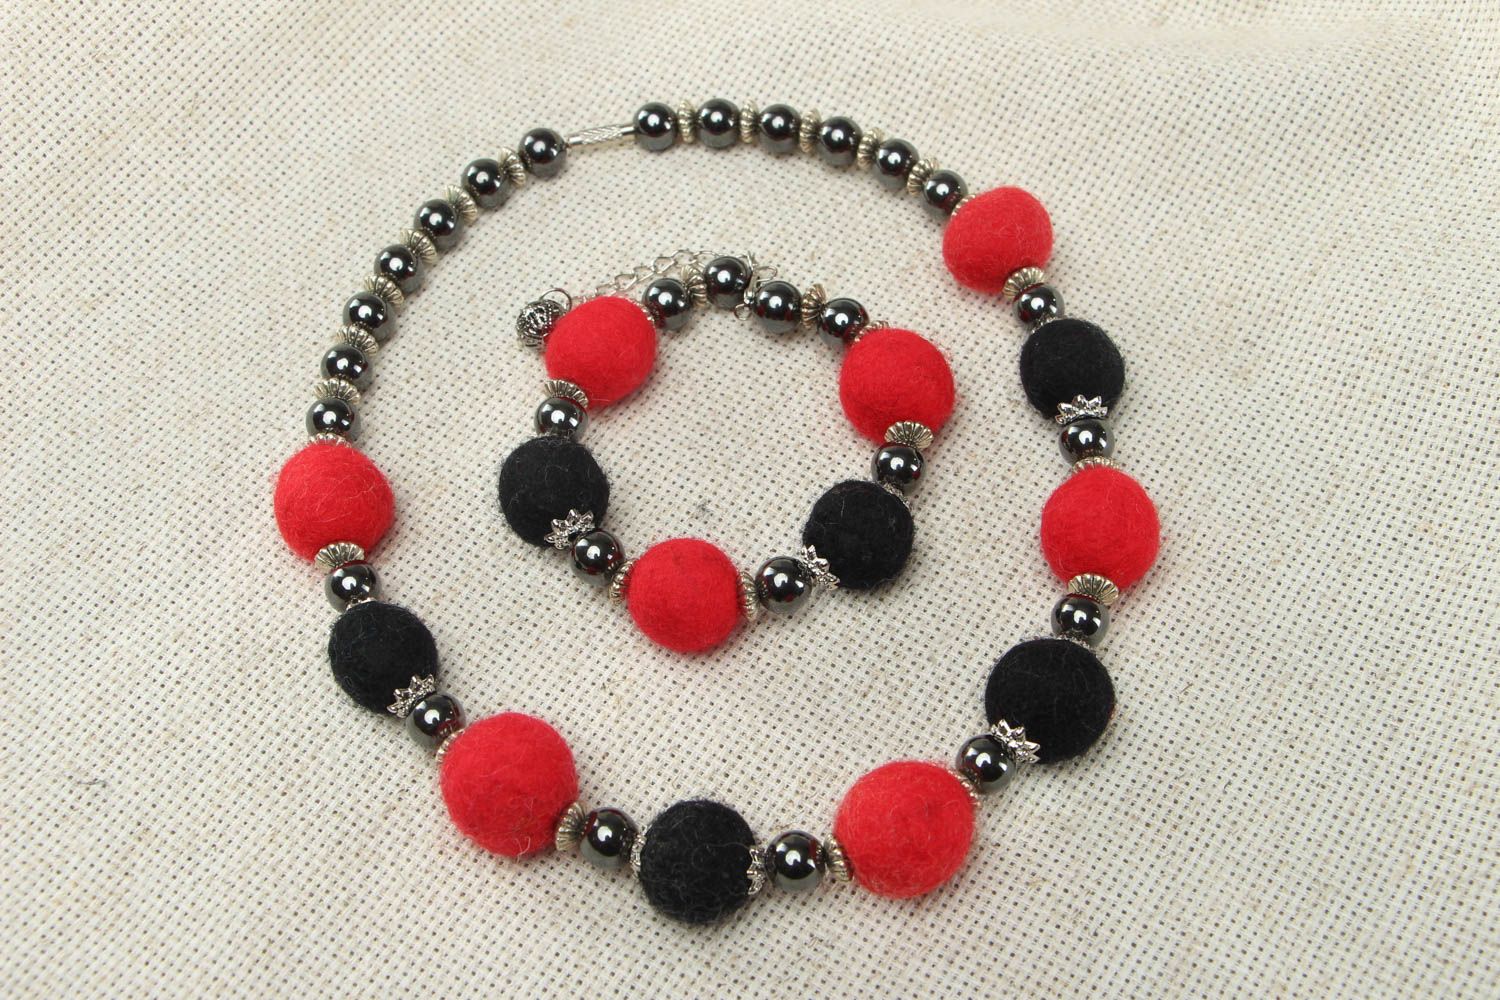 Felted wool bead necklace and bracelet photo 1